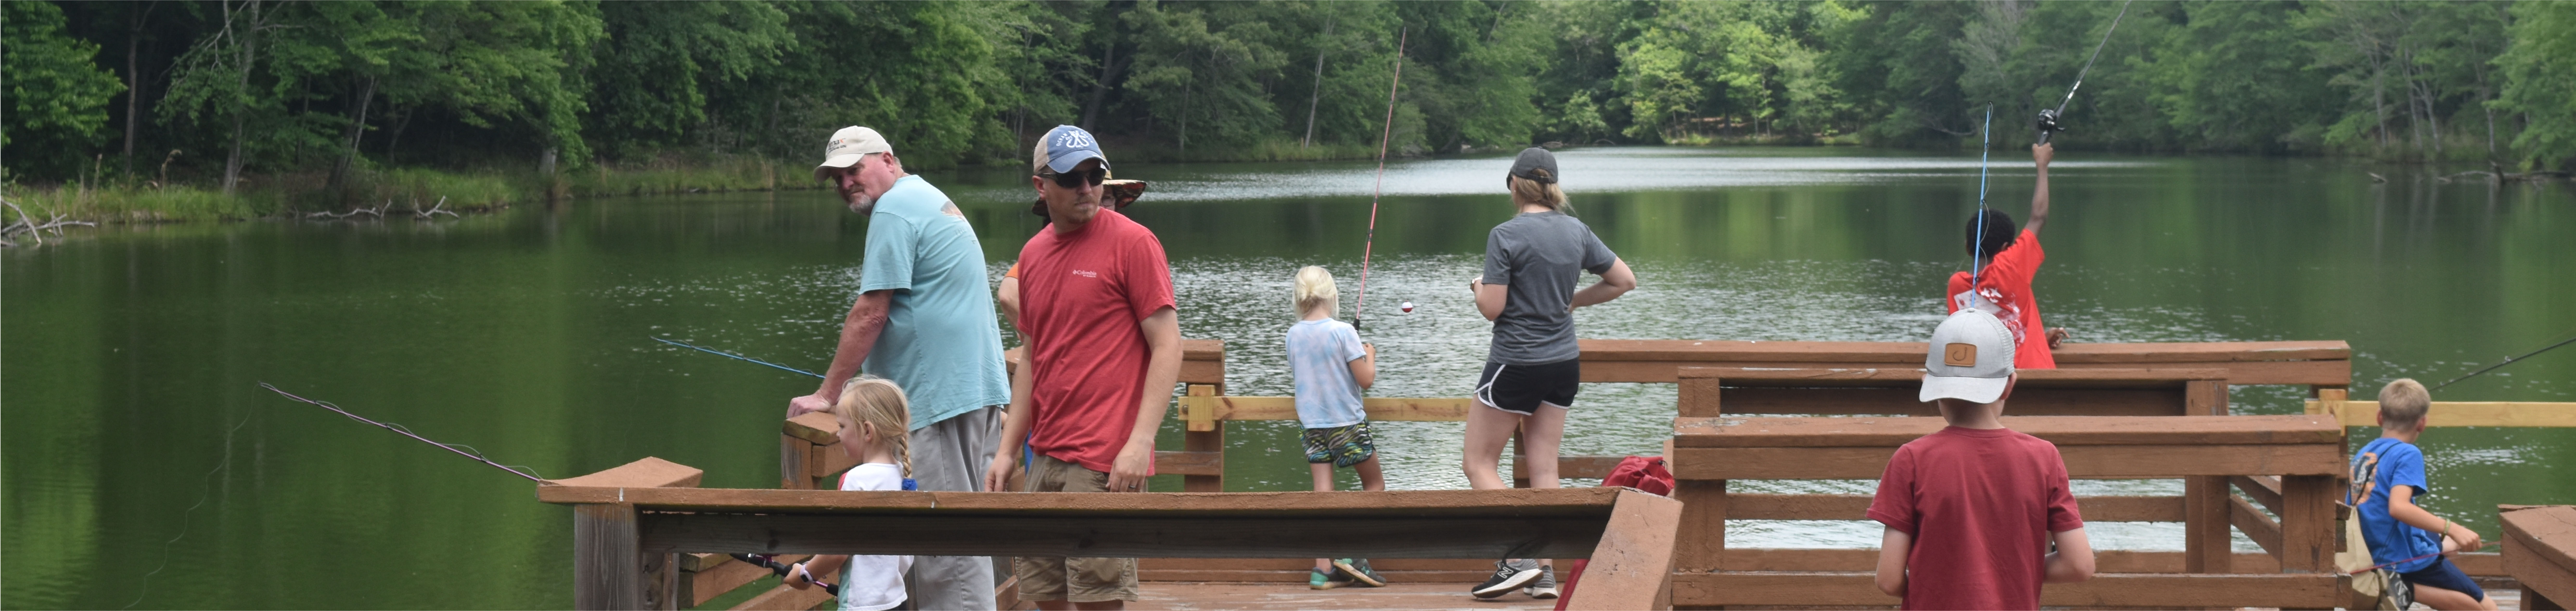 A group of people stand on a peir casting fishing poles.